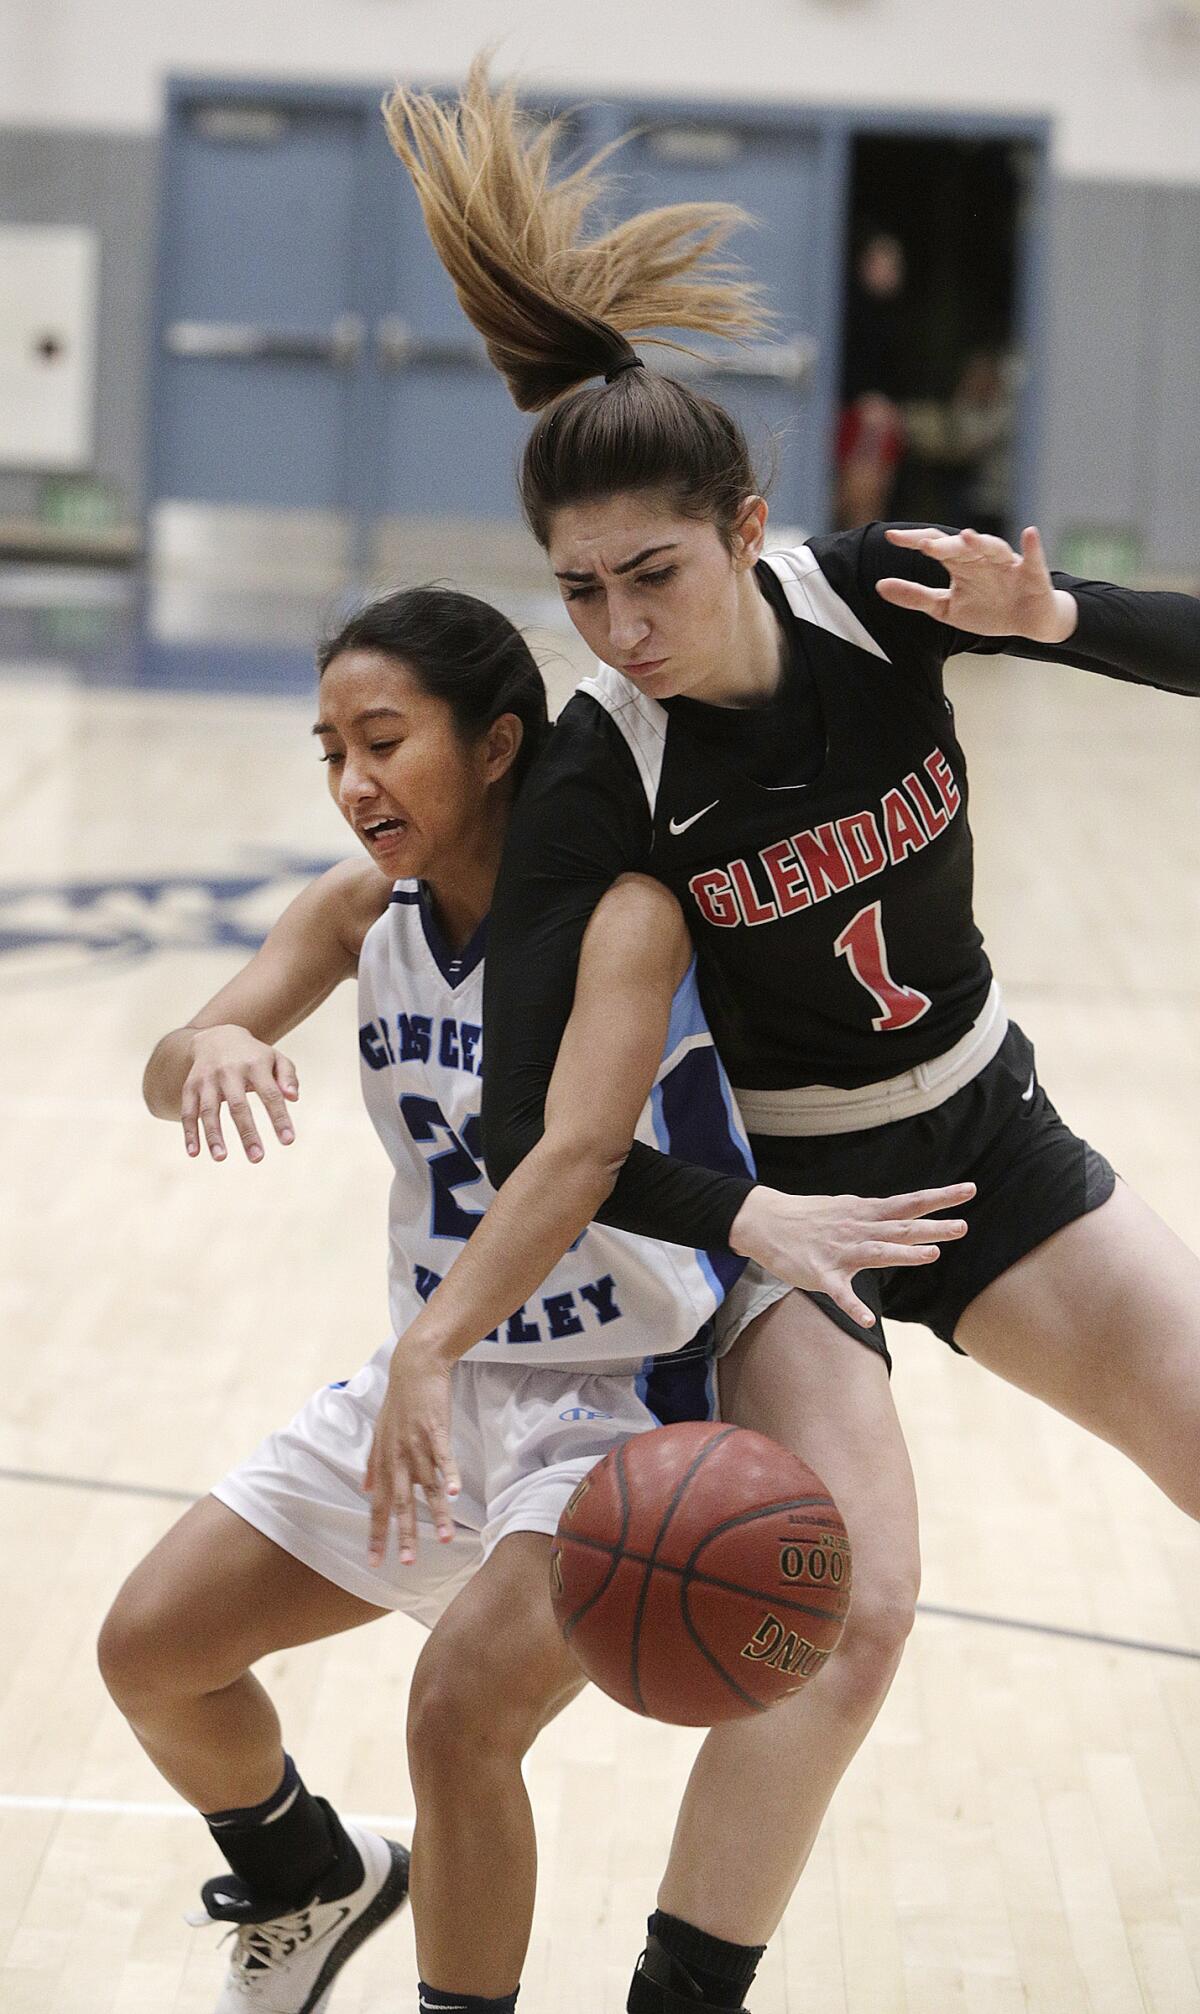 Crescenta Valley's Denise Dayag and Glendale's Mary Markaryan battle for a loose ball after a shot in a Pacific League girls' basketball game at Crescenta Valley High School on Tuesday, January 7, 2020.